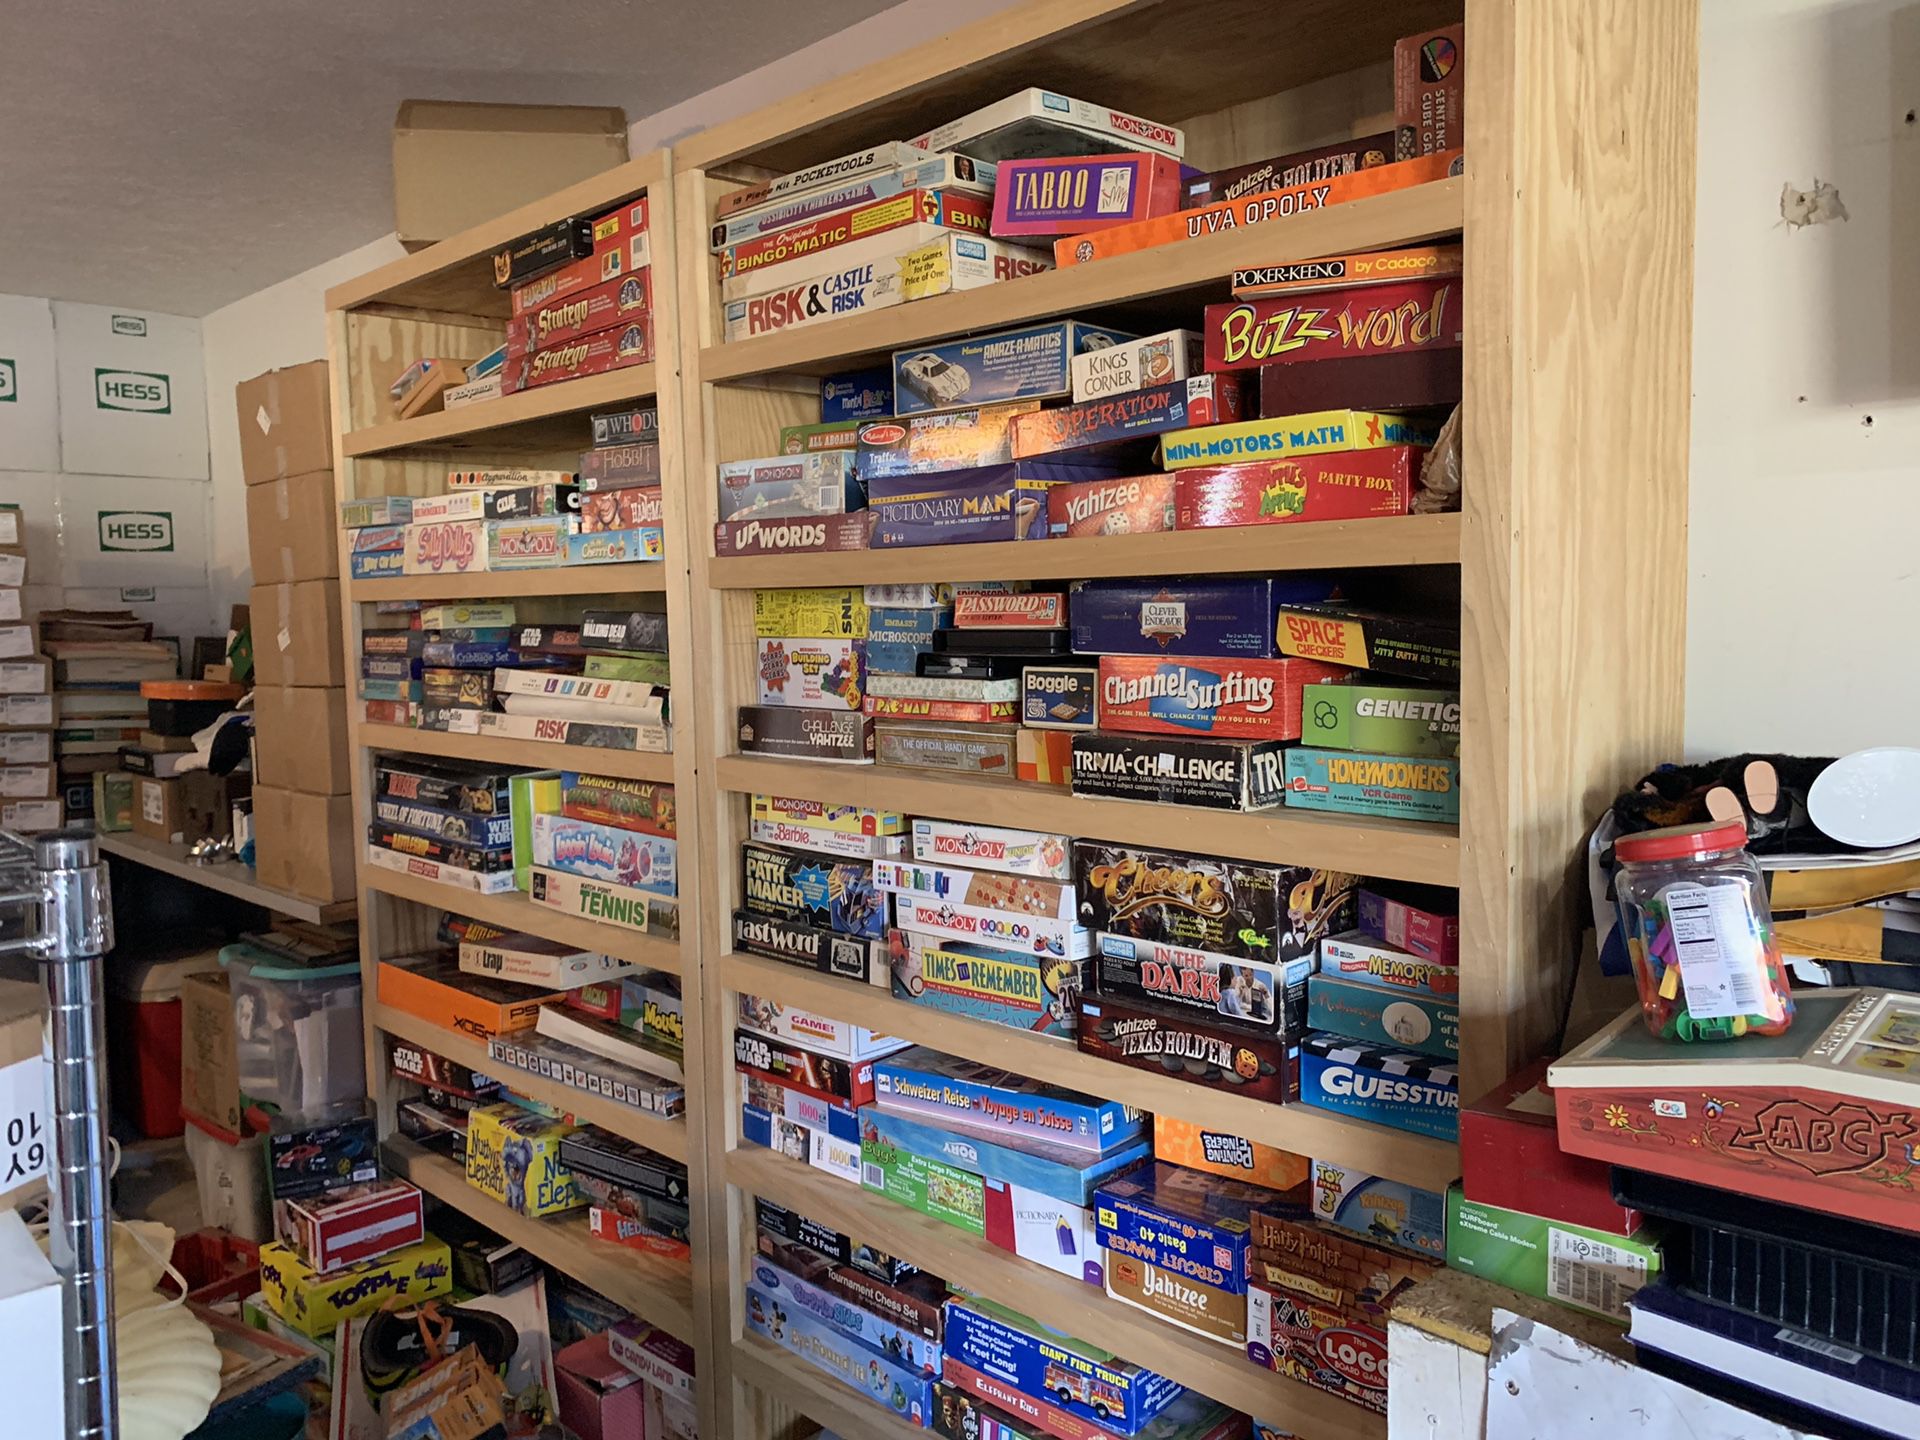 Lots of board games, stuff animals & more